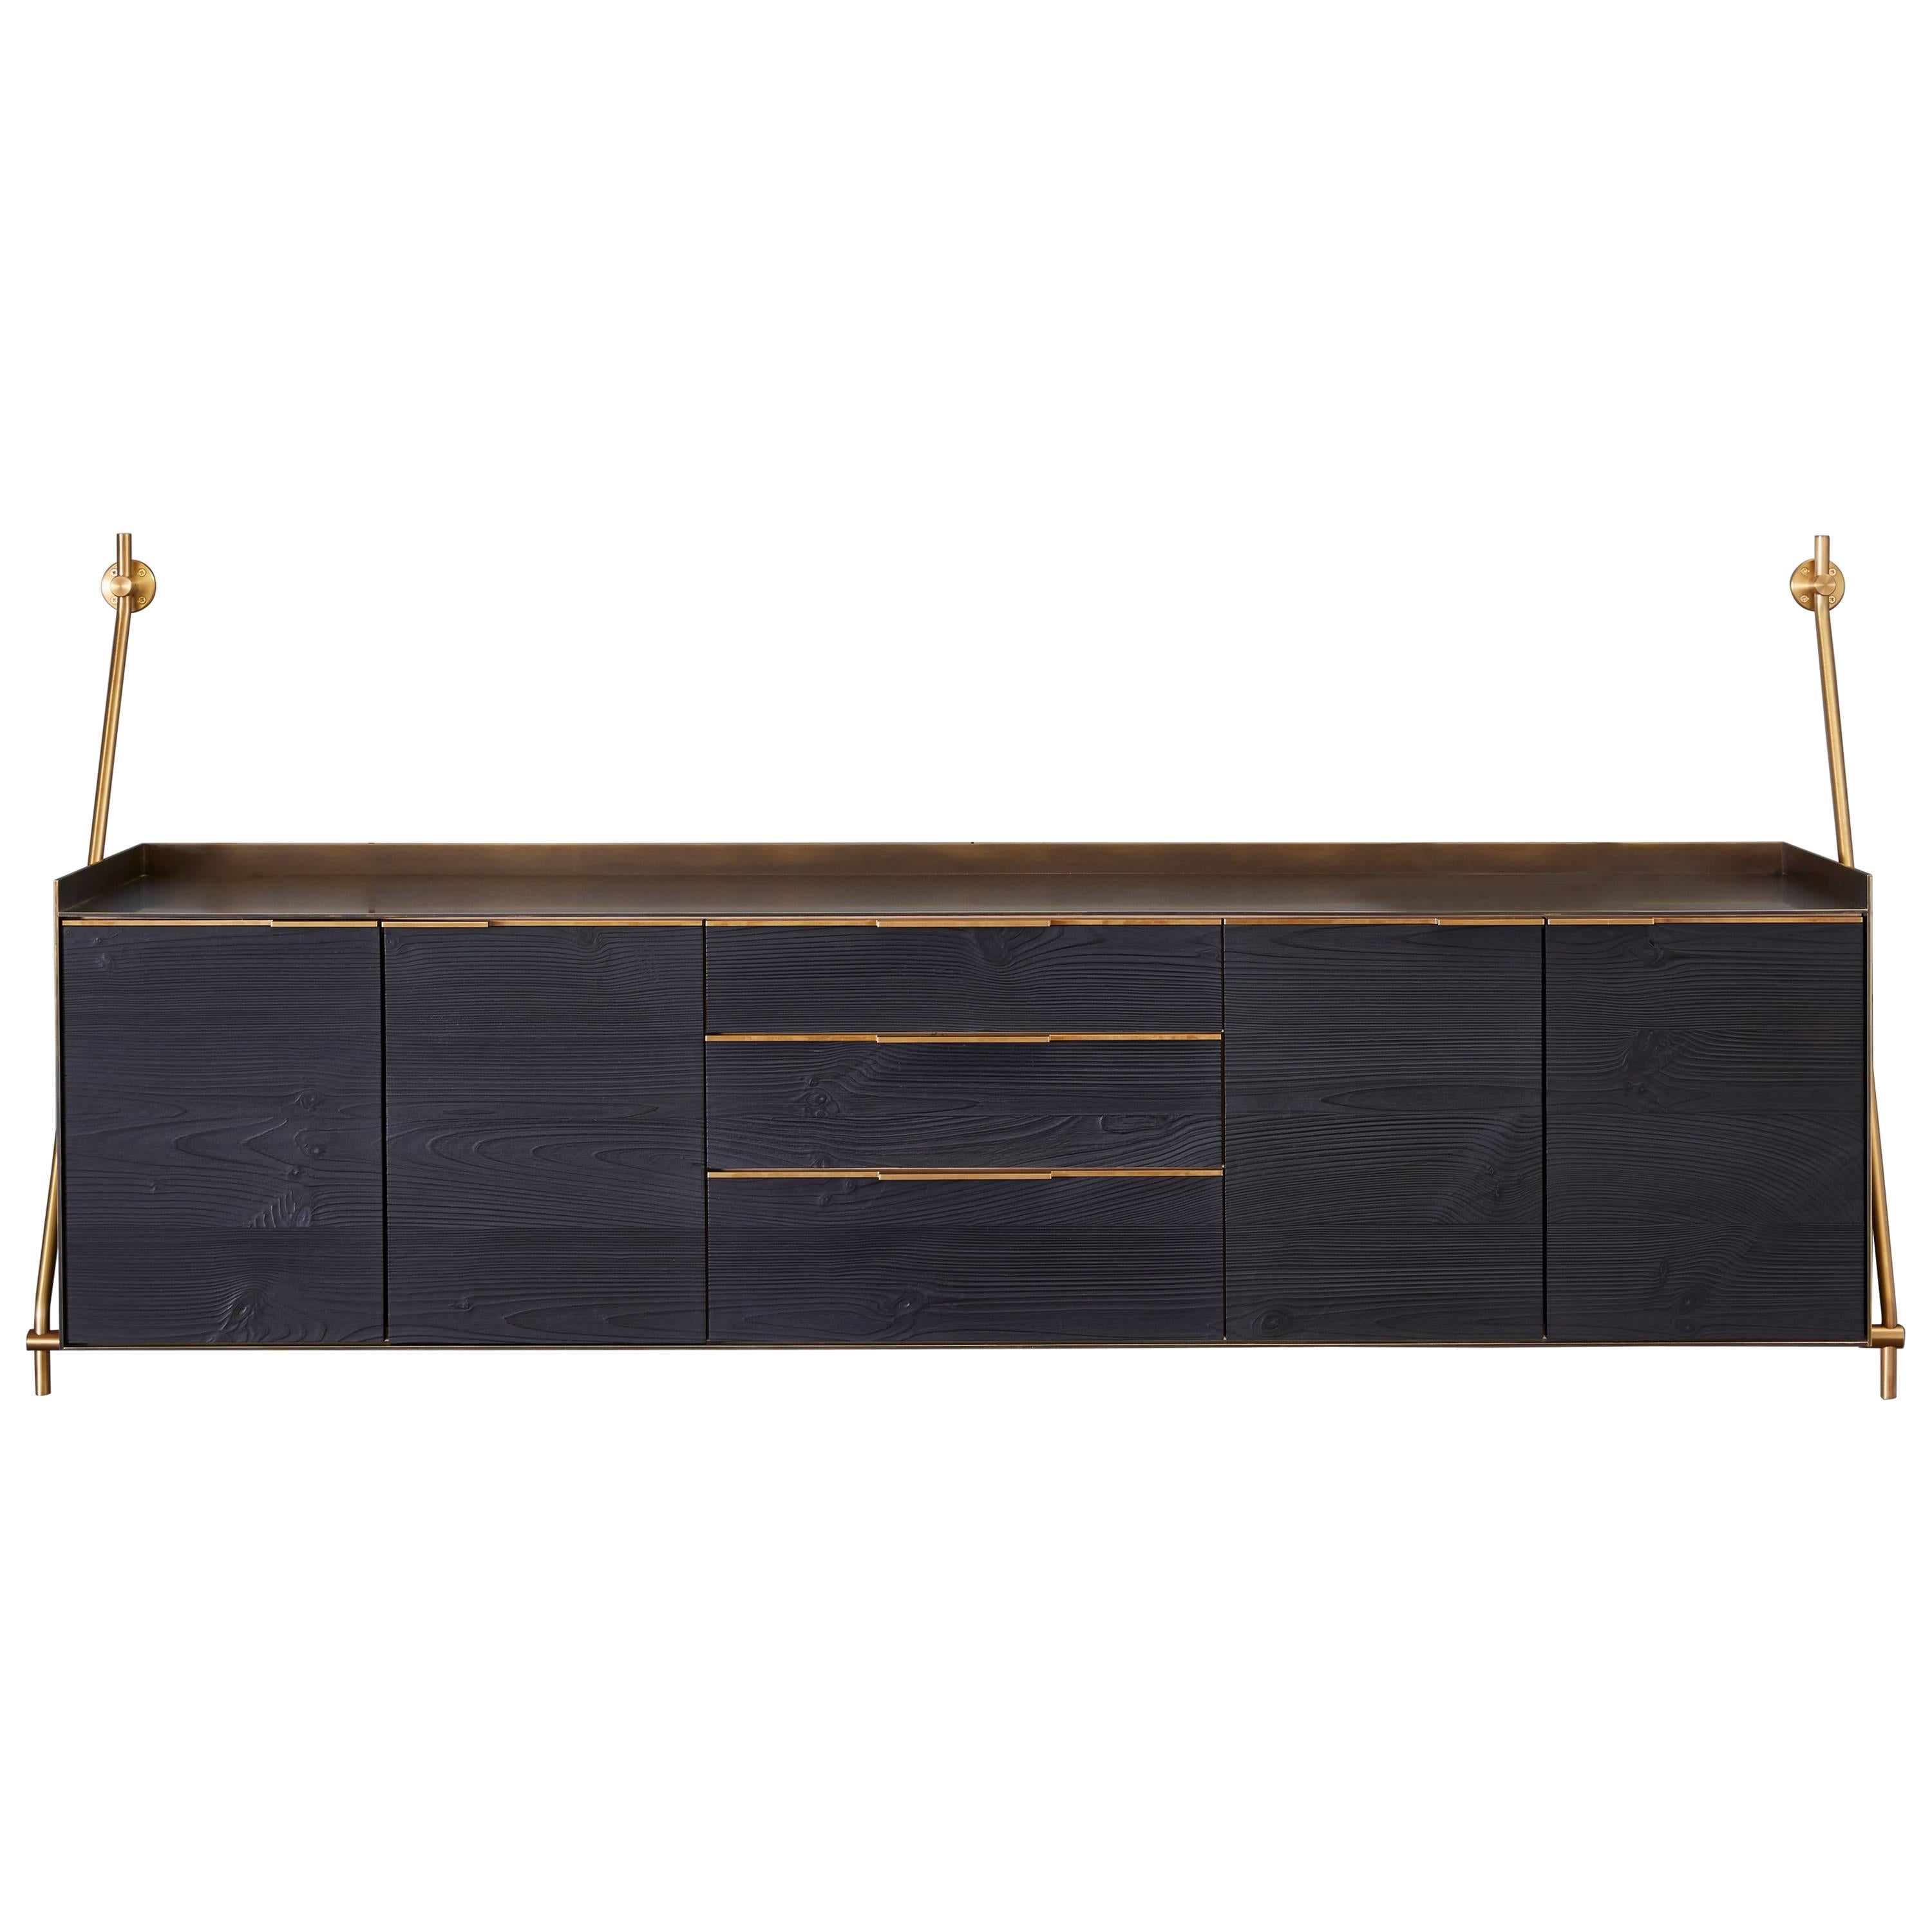 Amuneal’s wall hanging credenza is supported by our traditional collector’s shelving hardware in a warm brass finish. The credenza itself is clad in solid bronze with a deep, mottled, patinated finish with golden highlighted edges. The structure of